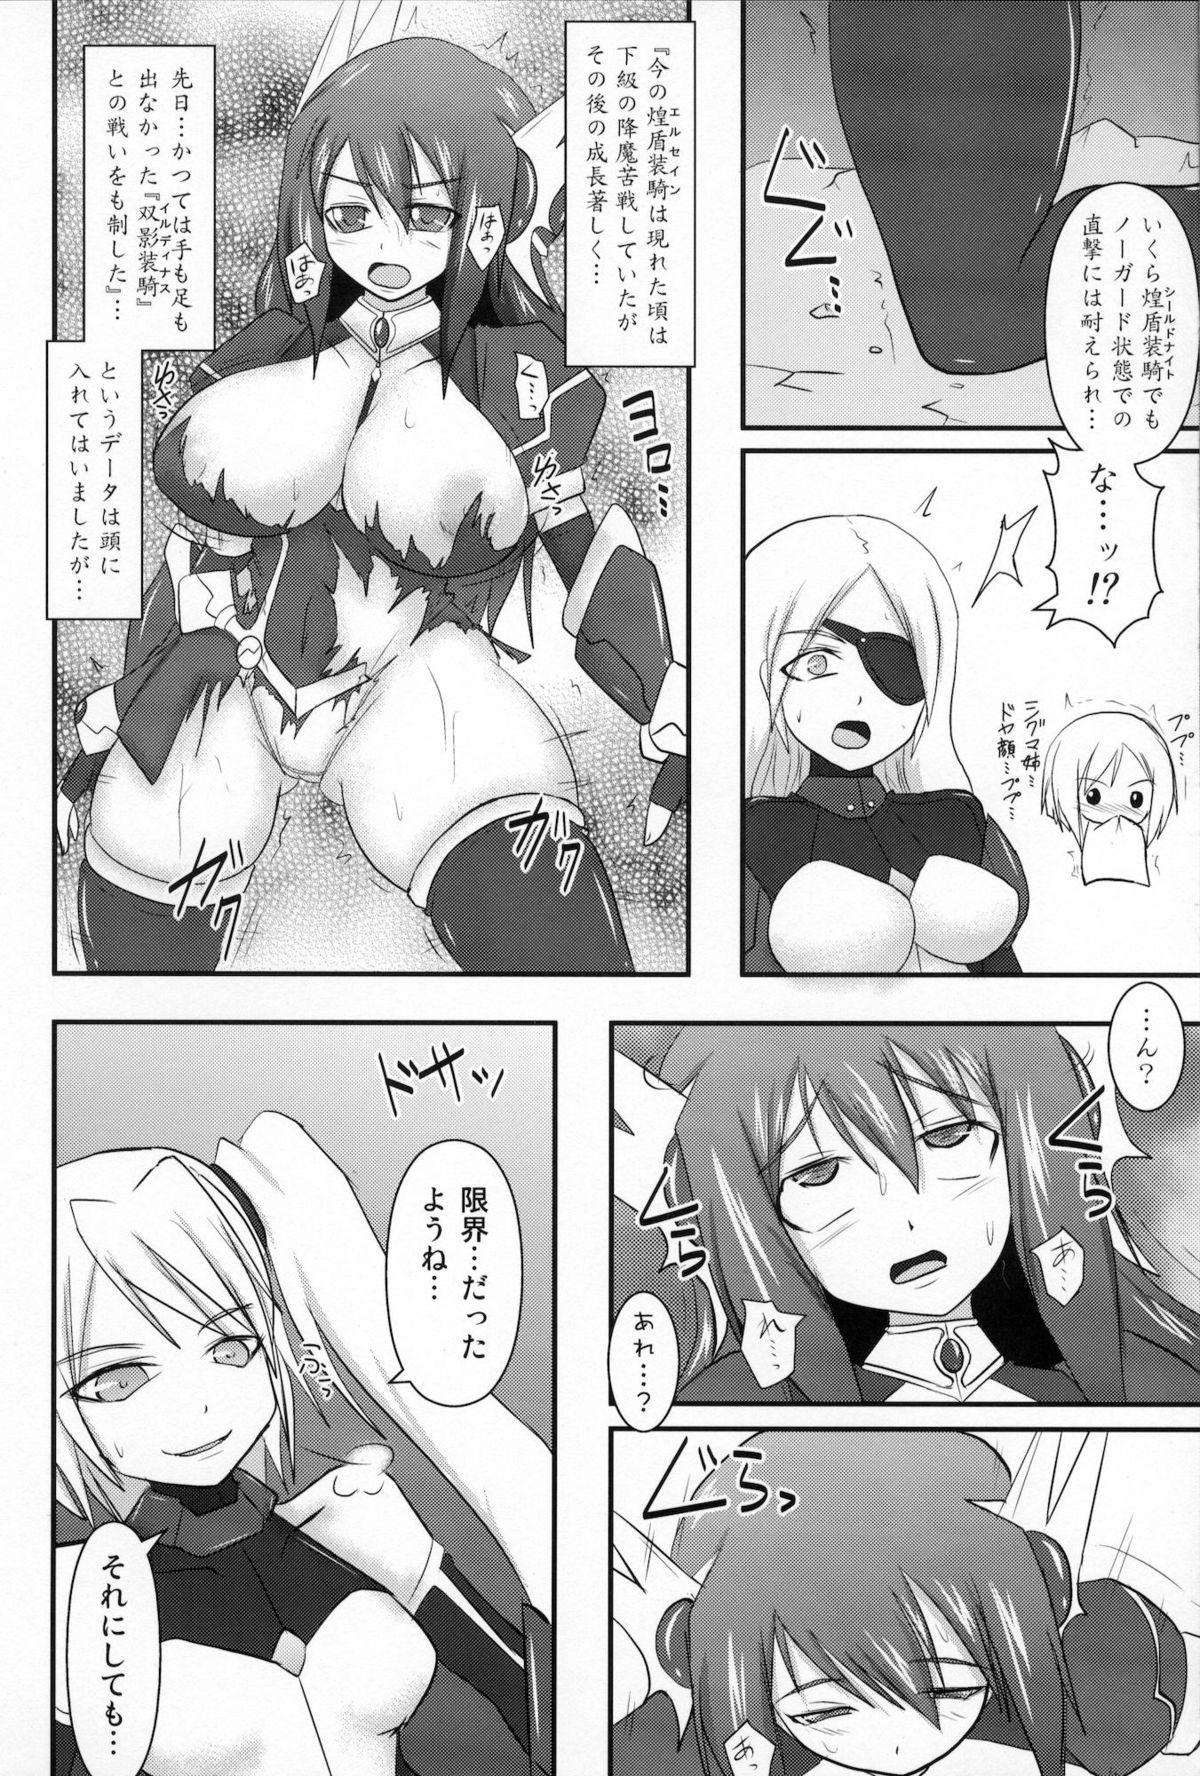 Youporn Shield Knight Elsain Vol. 10 MALICIOUS SISTERS Sex Pussy - Page 7